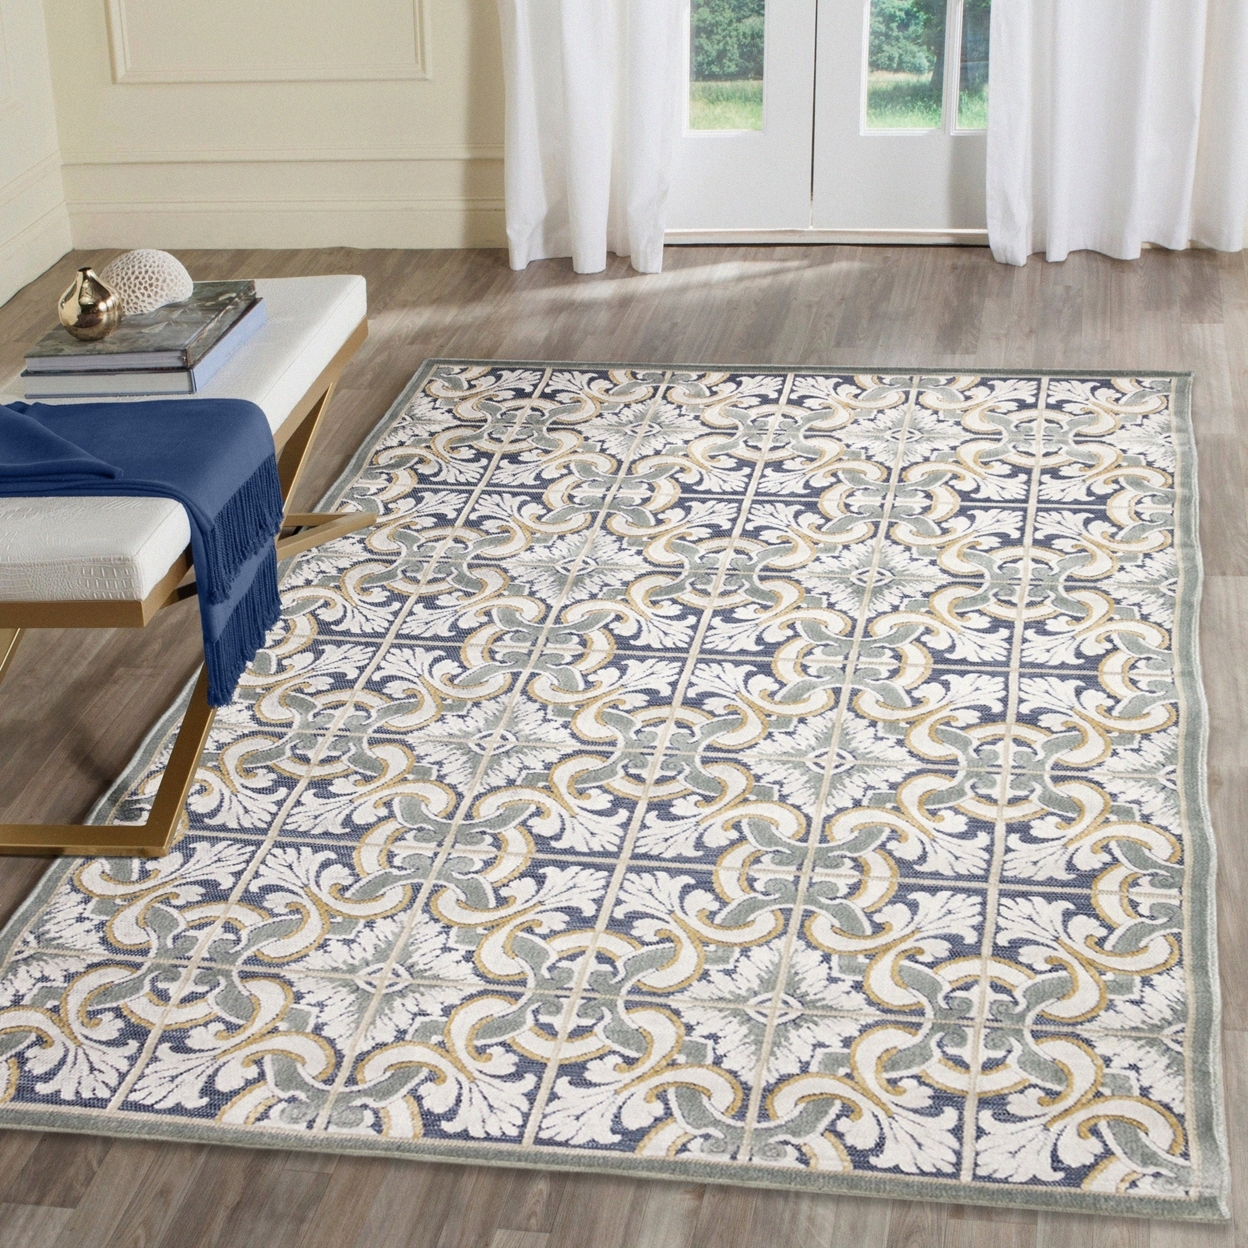 Liora Manne Canyon Floral Tile Indoor Outdoor Area Rug Navy - 6'5 X 9'4